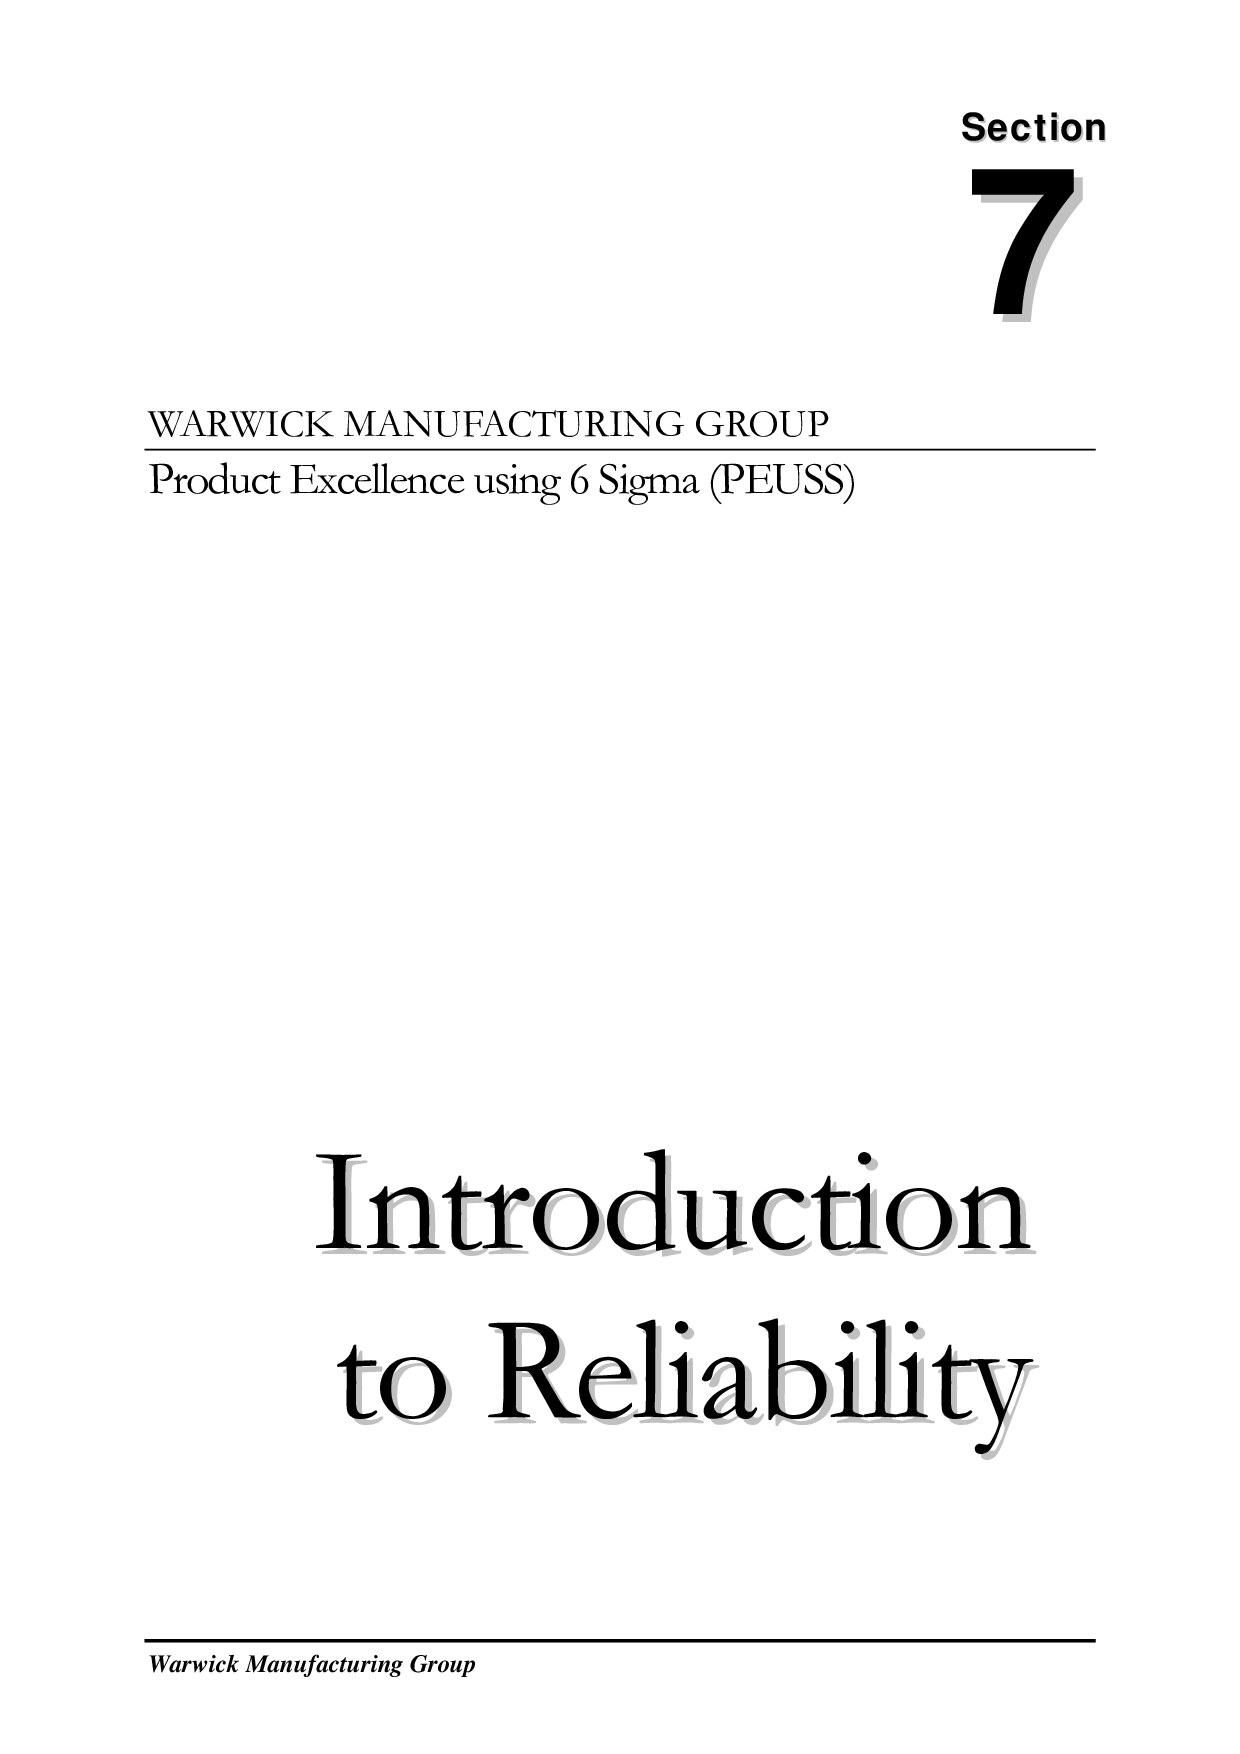 Introduction to Reliability: Product Excellence using 6 Sigma (PEUSS)